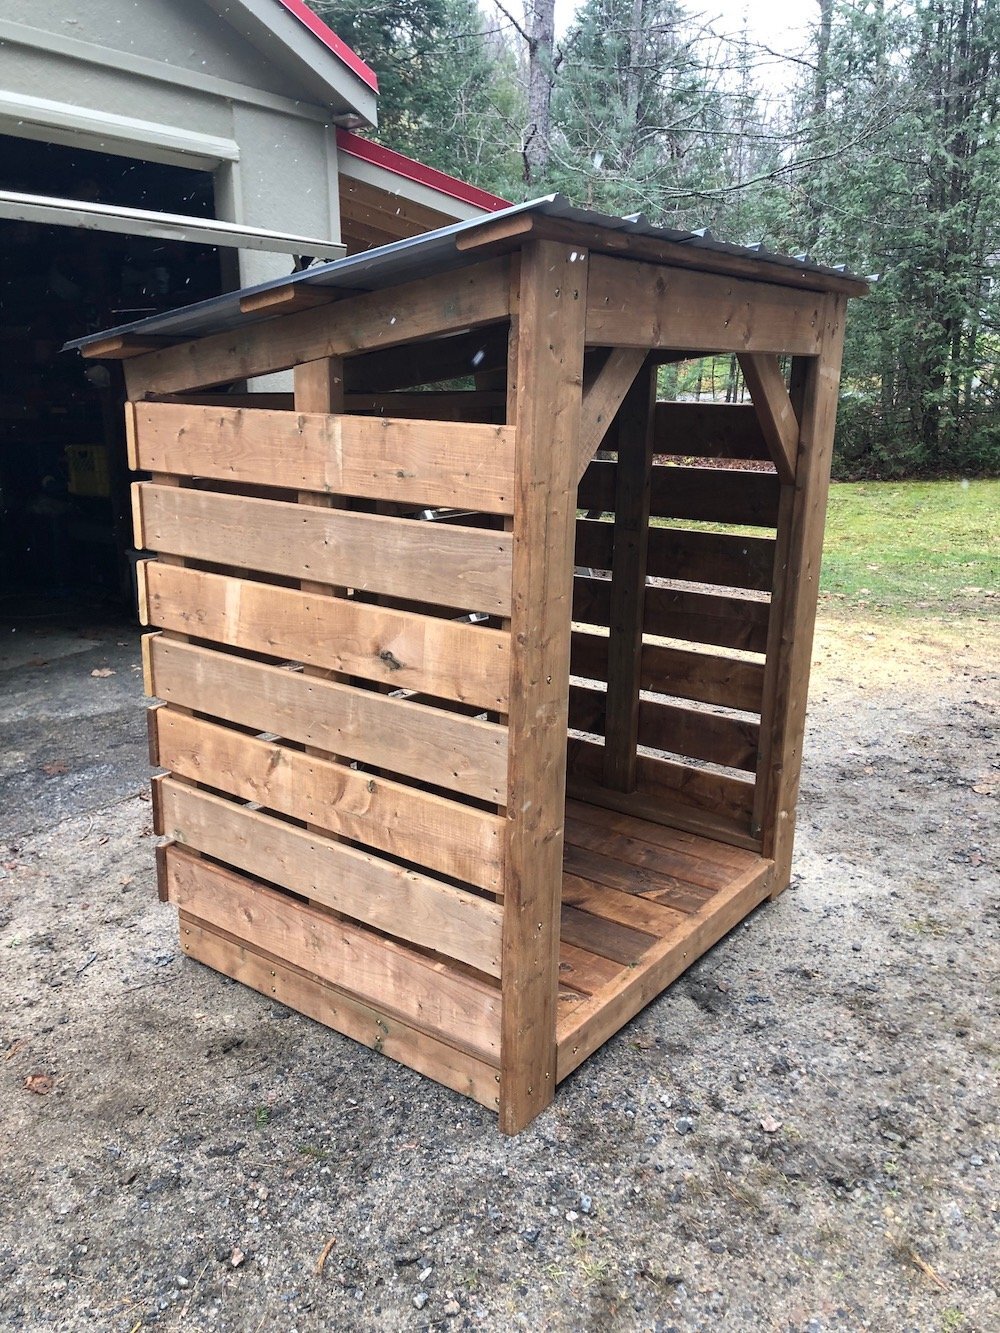 Small Fire Wood Storage Shelter? - Storage Rack Solutions